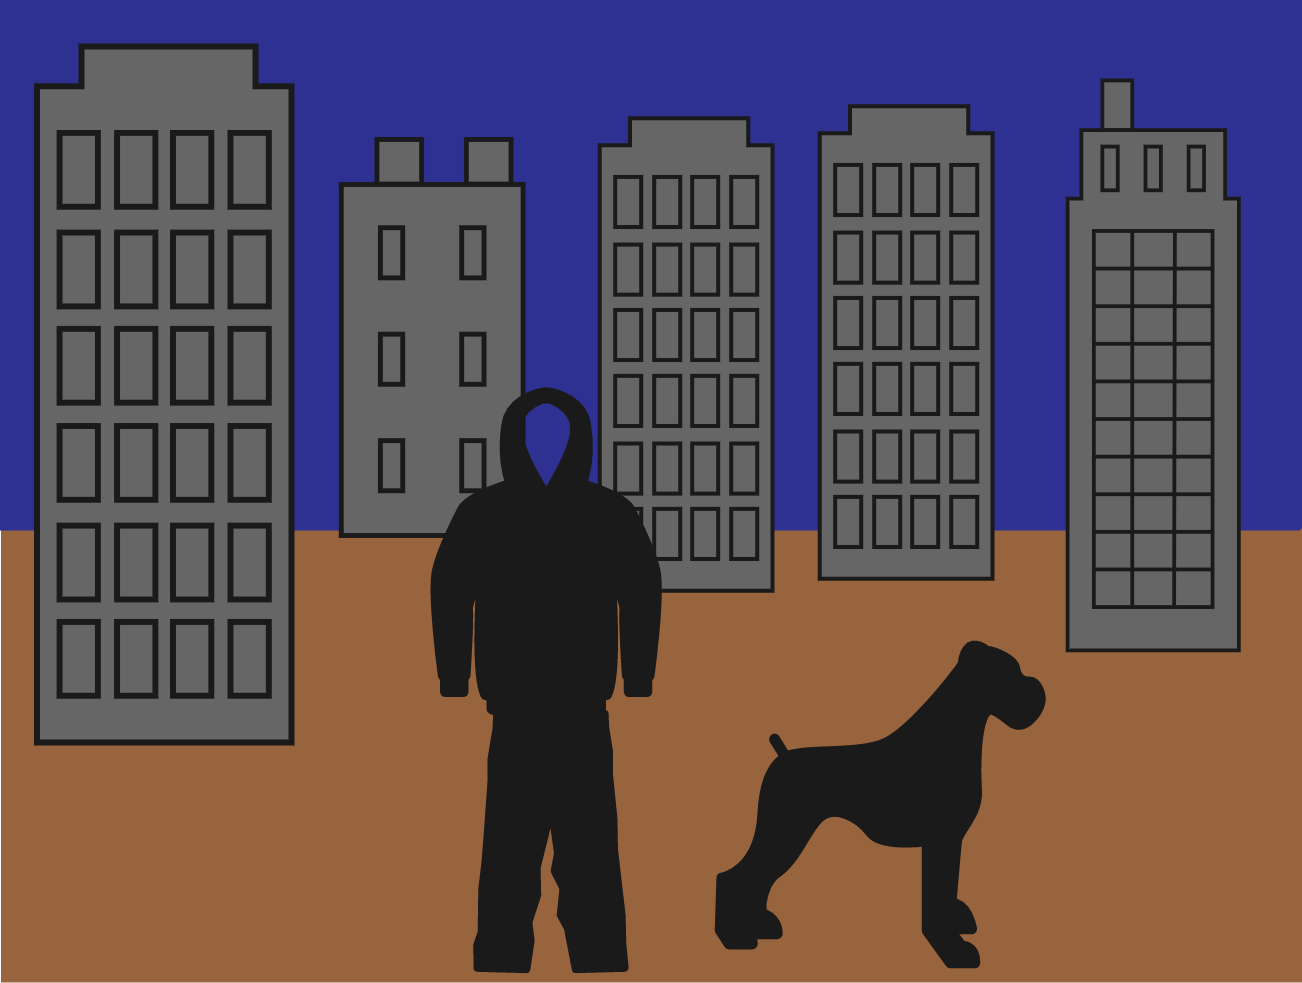 AutoDraw sketch of a man, dog, and some buildings